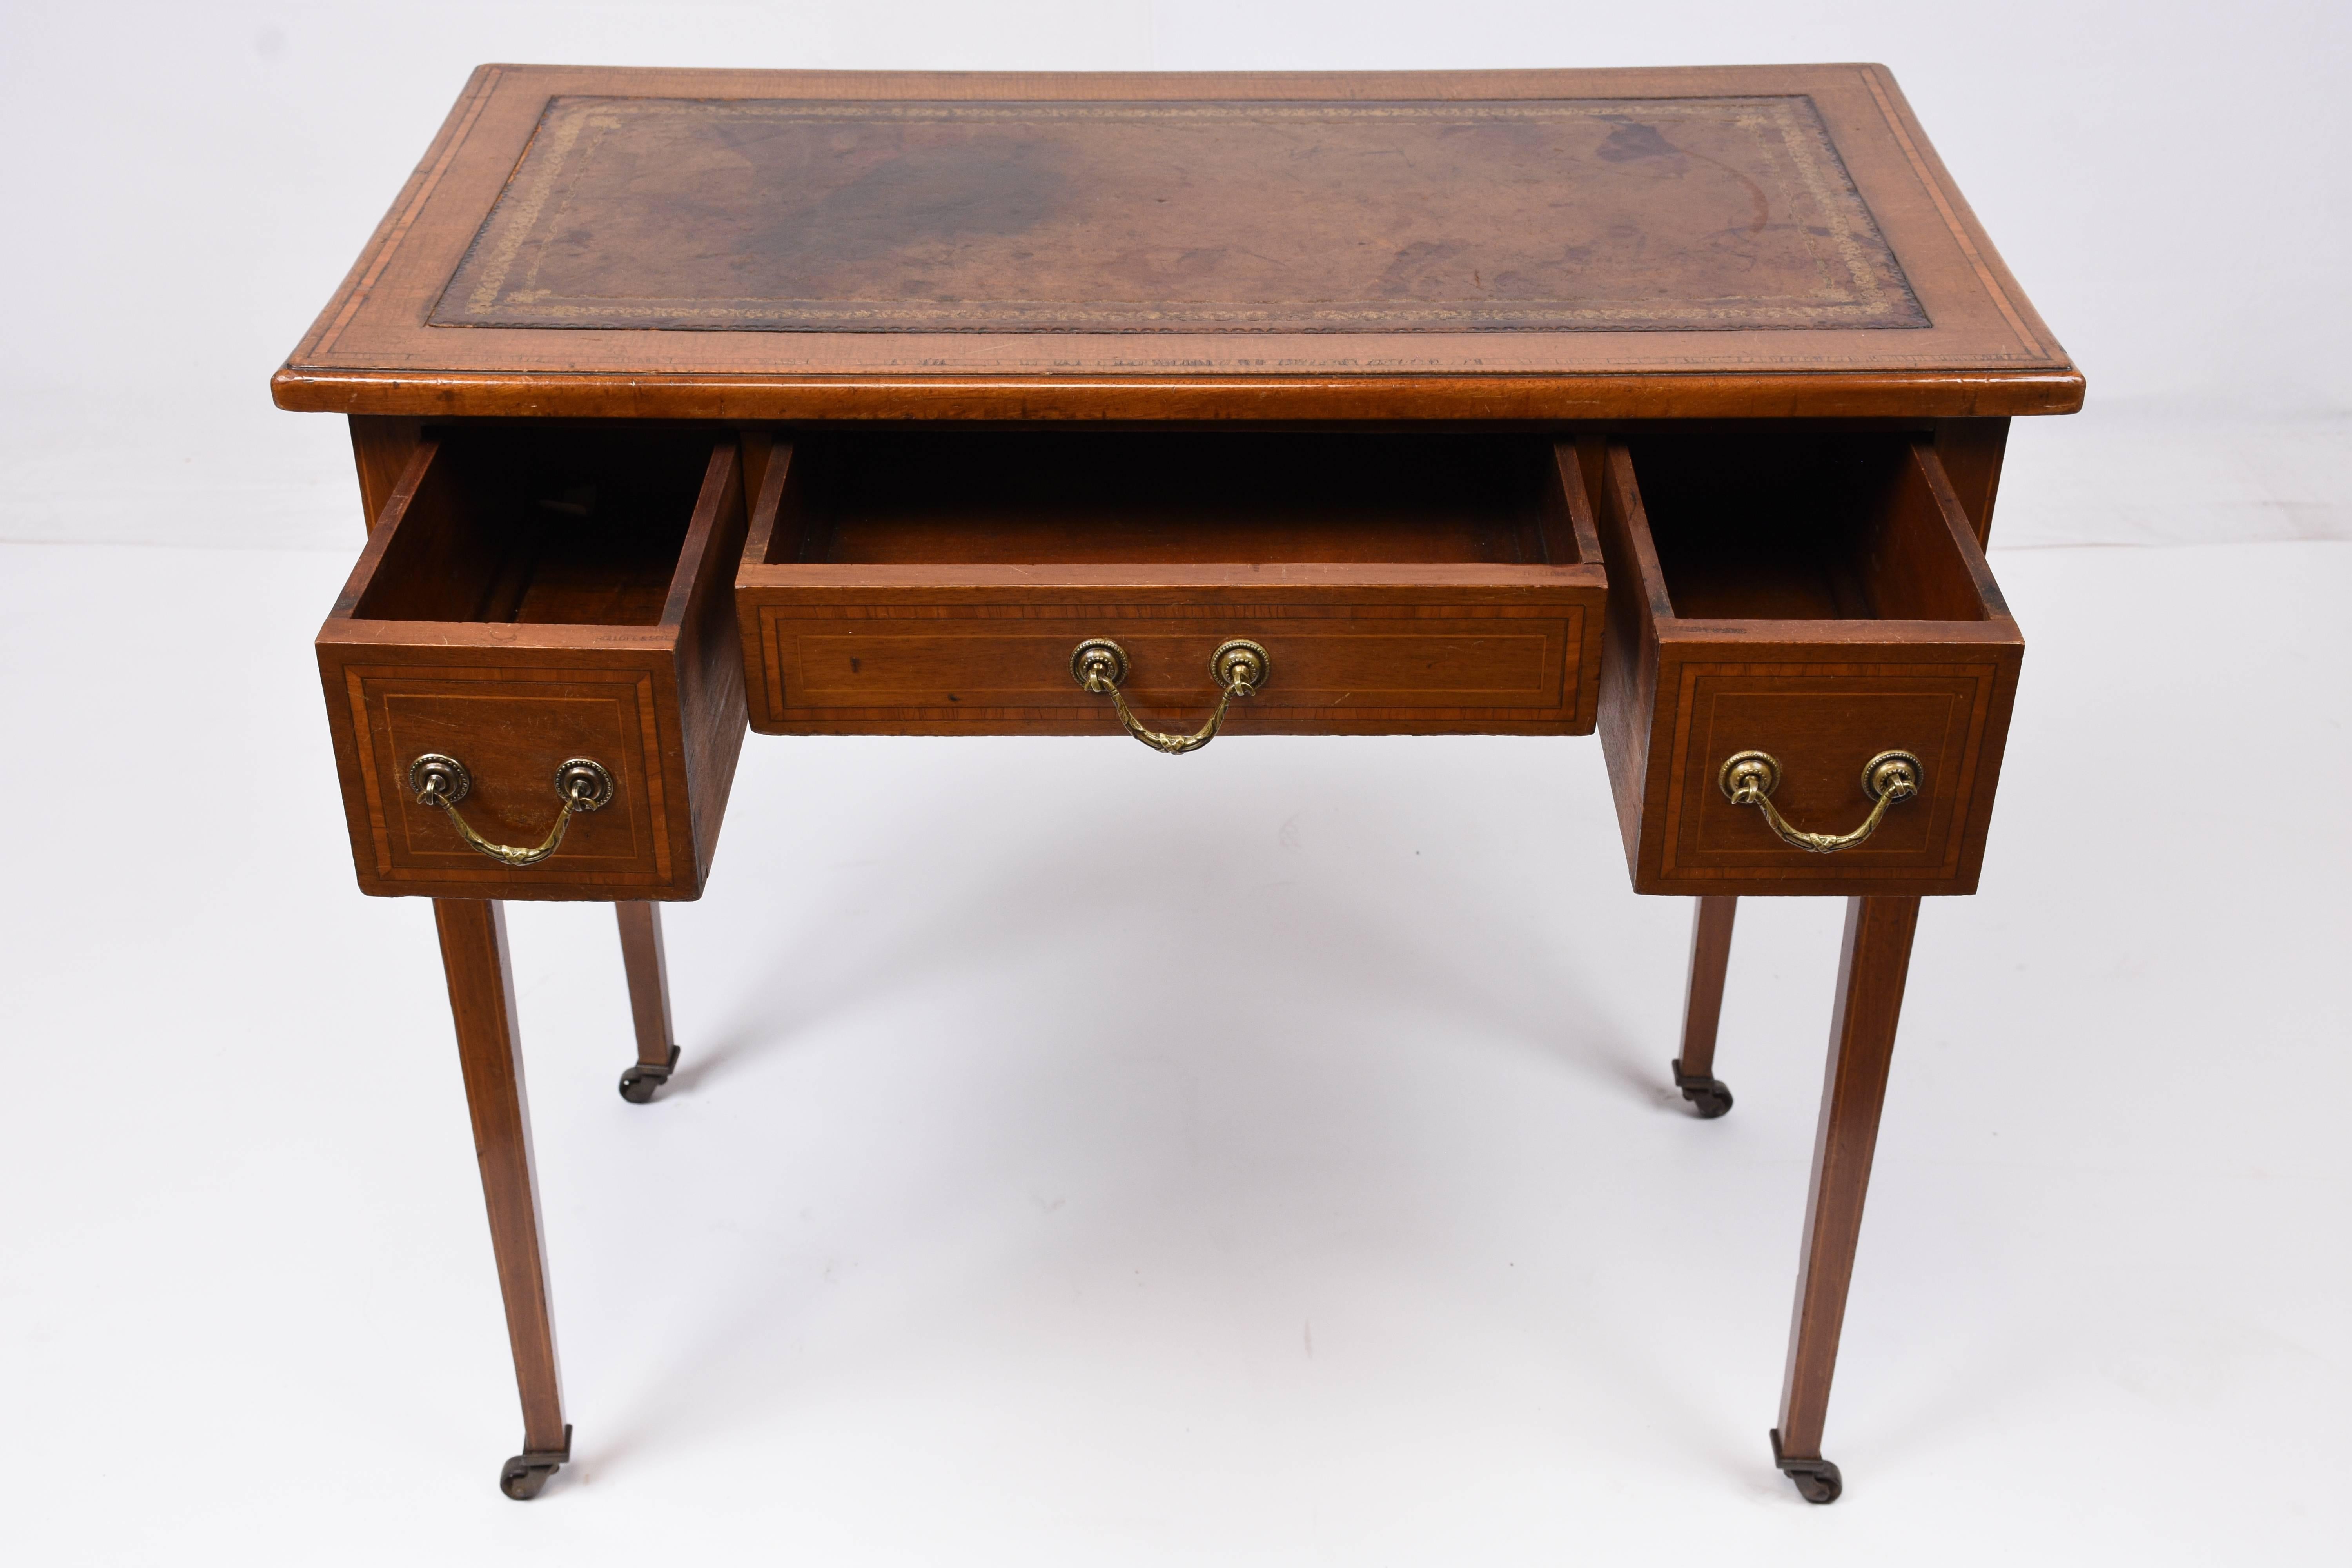 This 1870s antique English traditional-style writing desk is made from mahogany wood in its original mahogany color stain. The top of the desk is adorned with the original embossed leather work area with gilt trim details and an inlaid wood boarder.